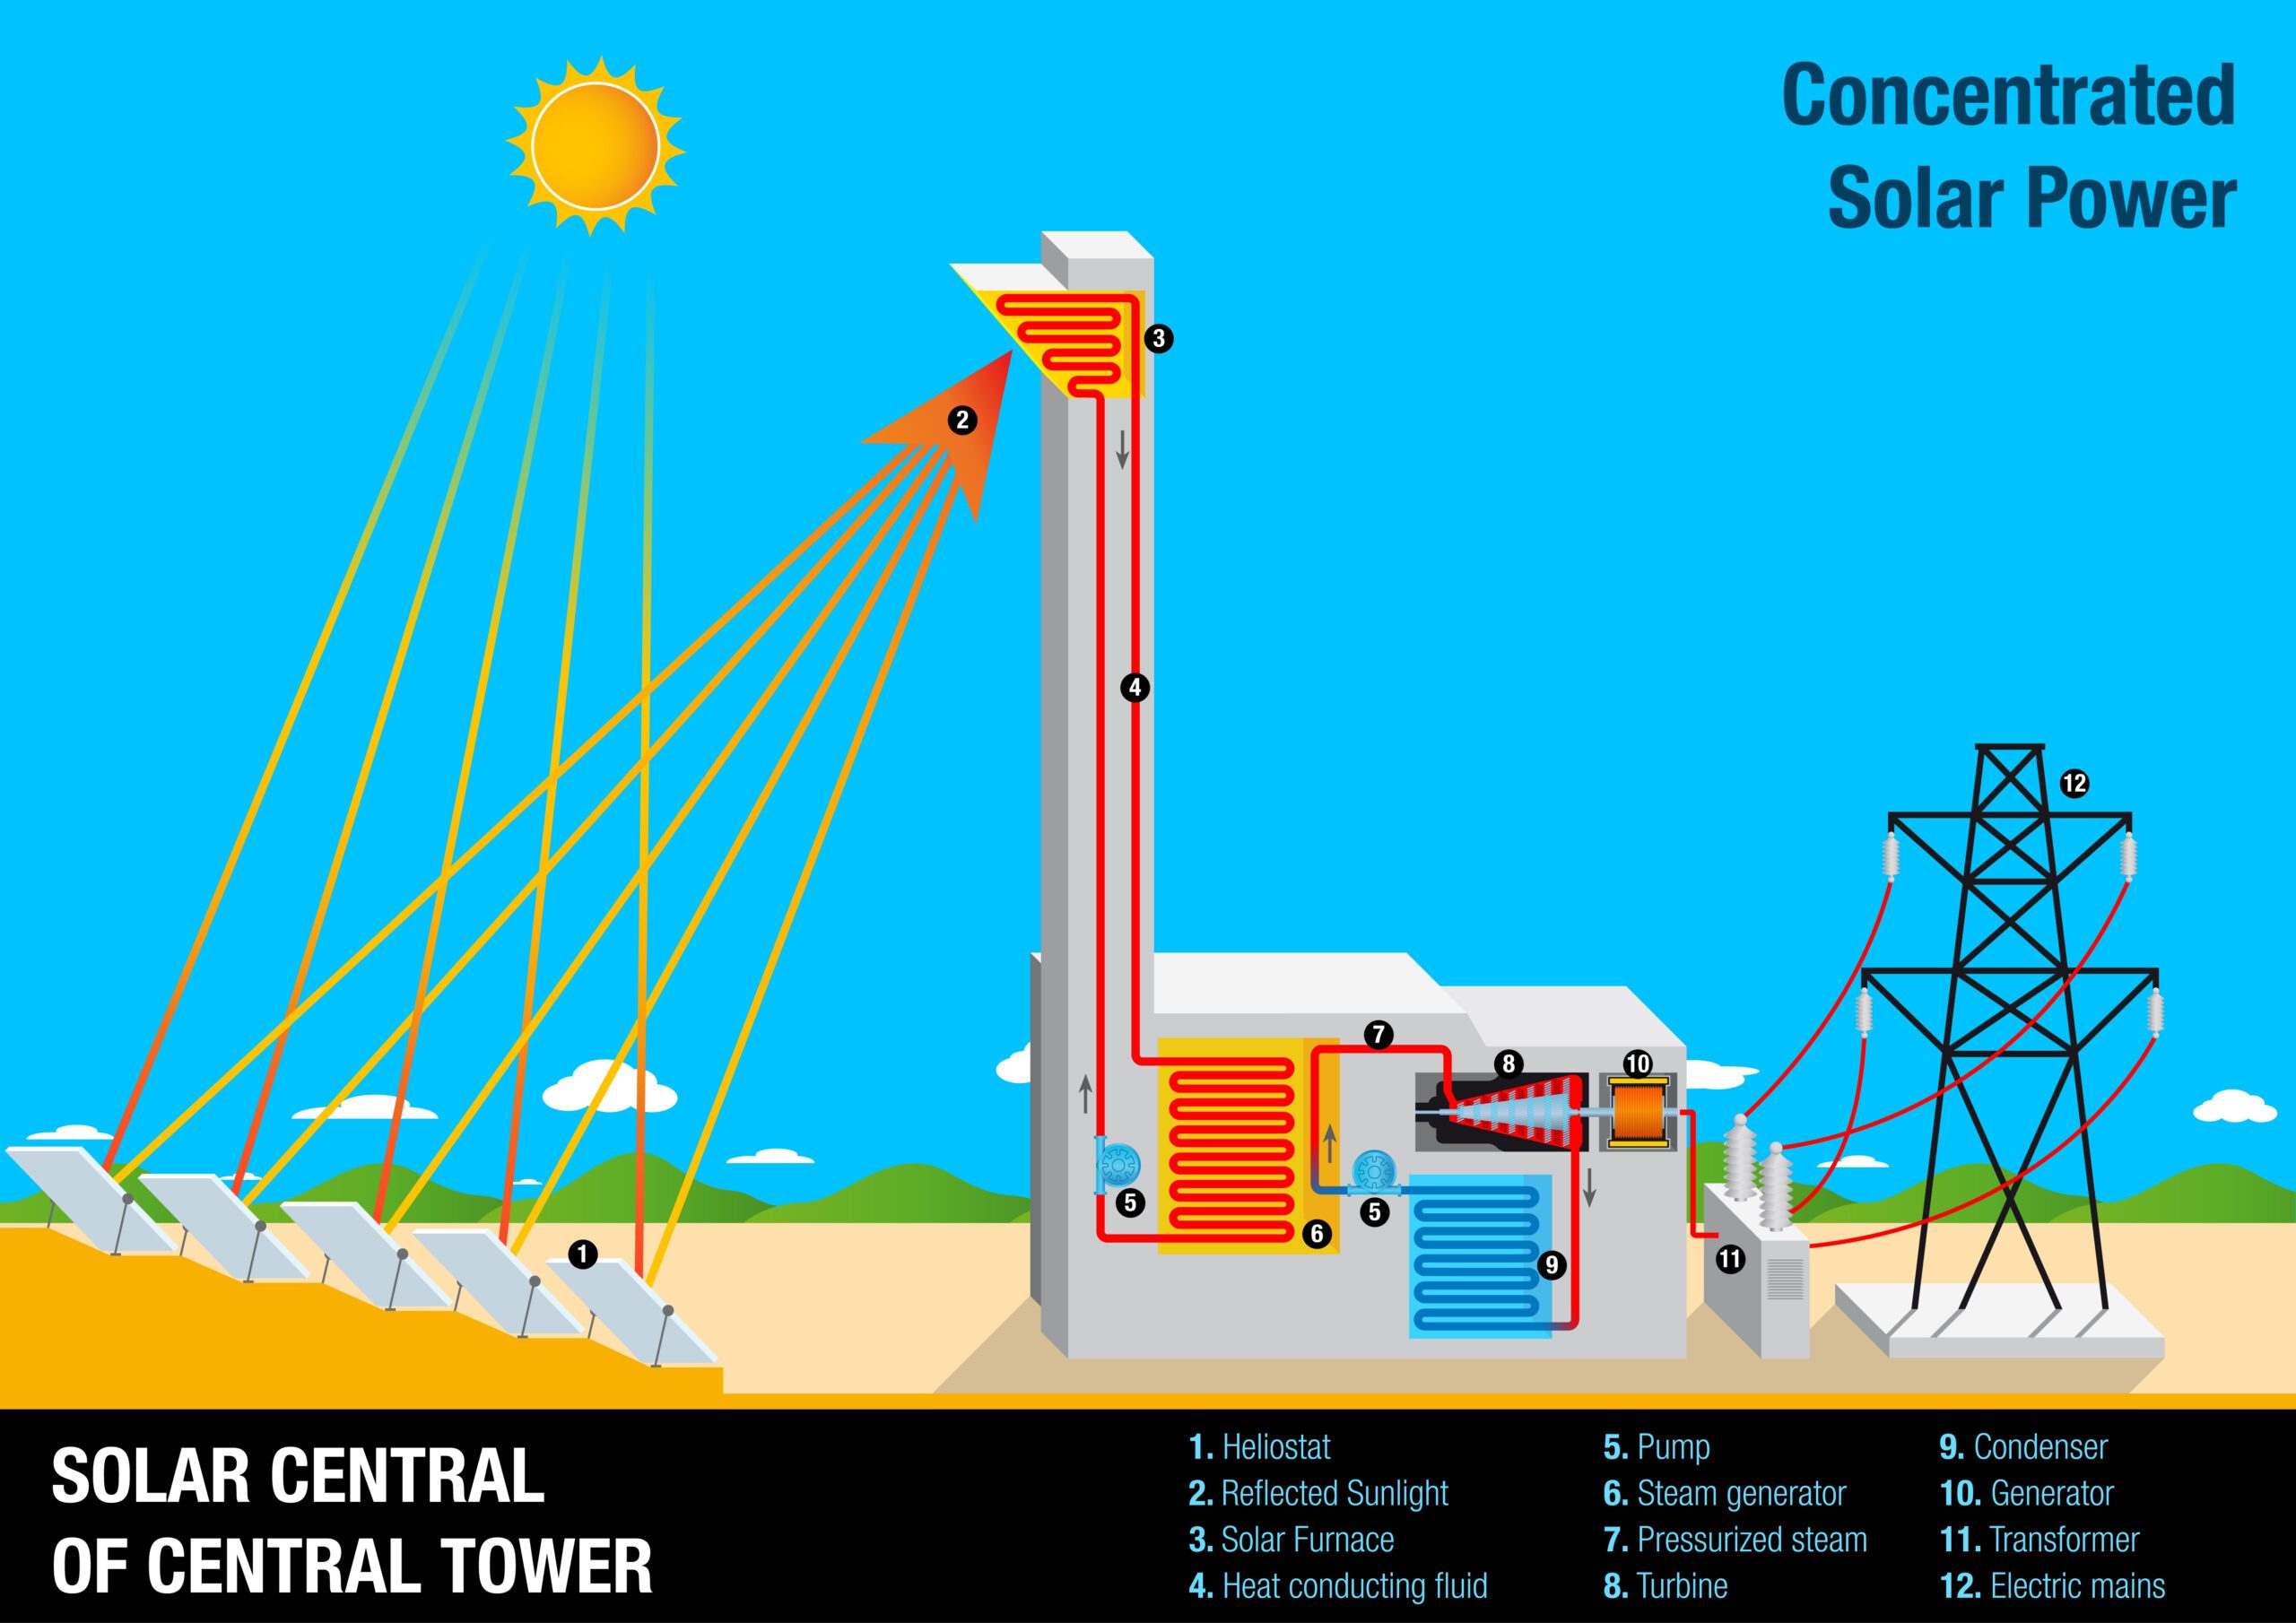 An infographic showing a concentrated solar power plant using a central tower to collect solar energy.